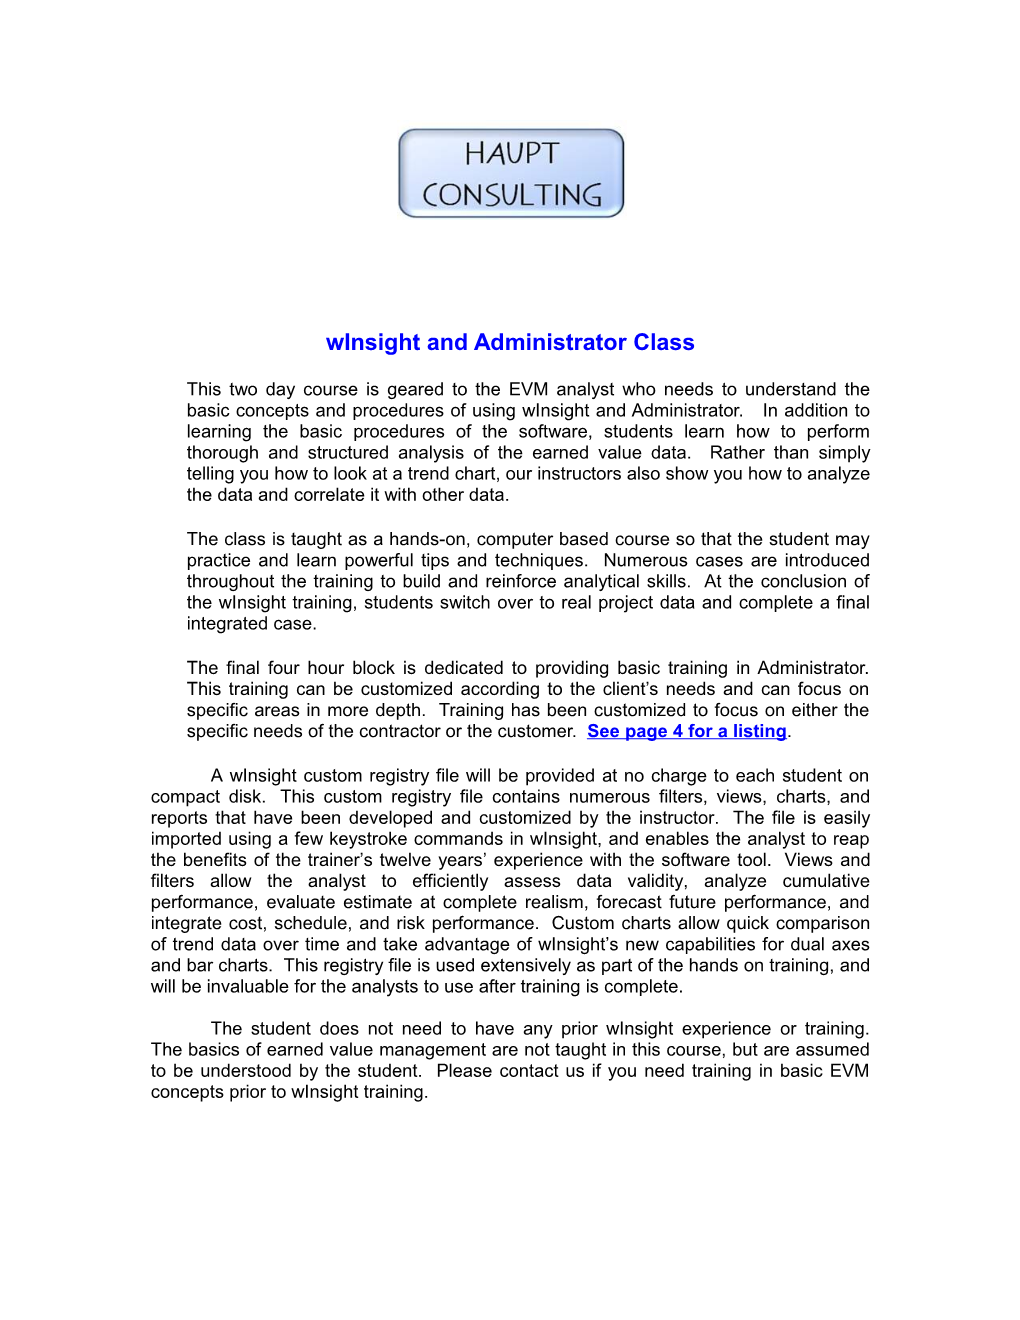 Winsight and Administrator Class